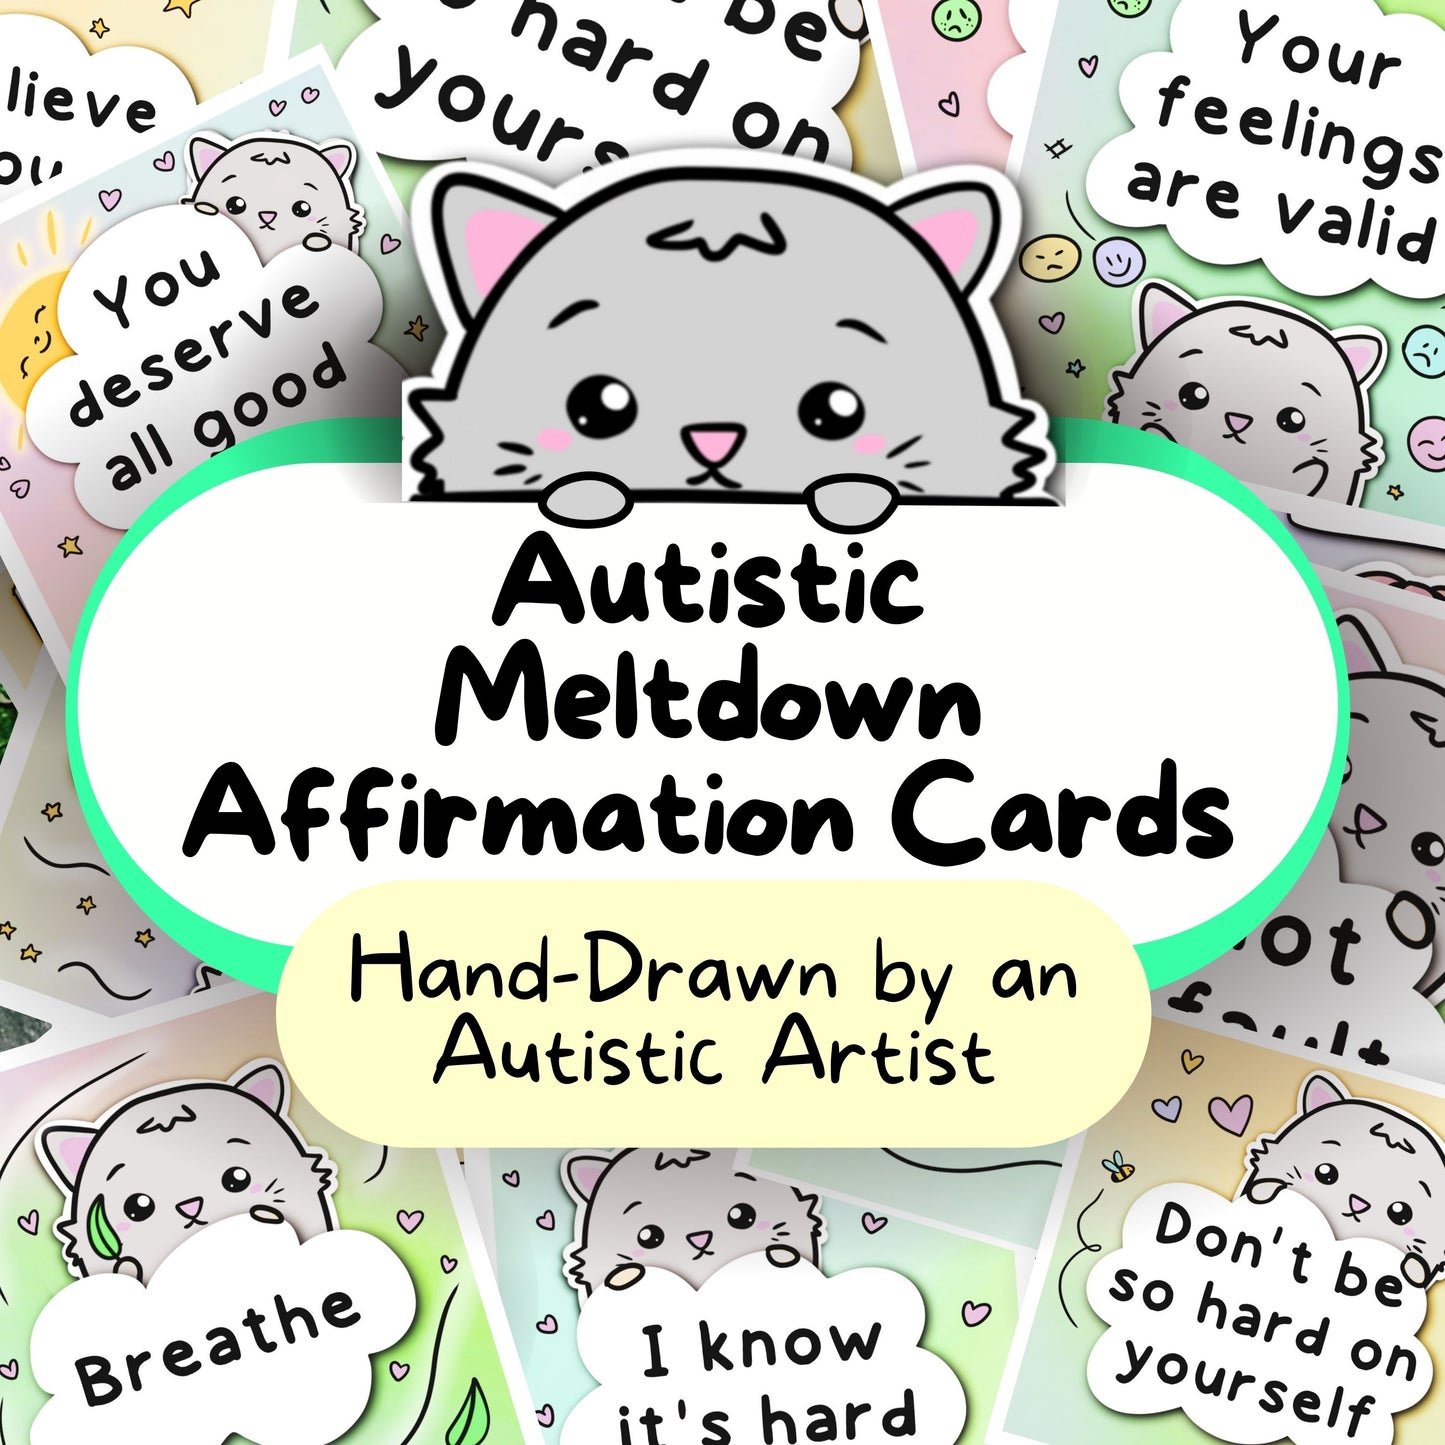 Communication Cards & Affirmation Cards (Digital) ft. Sendo, the Cat - Private Practice Use